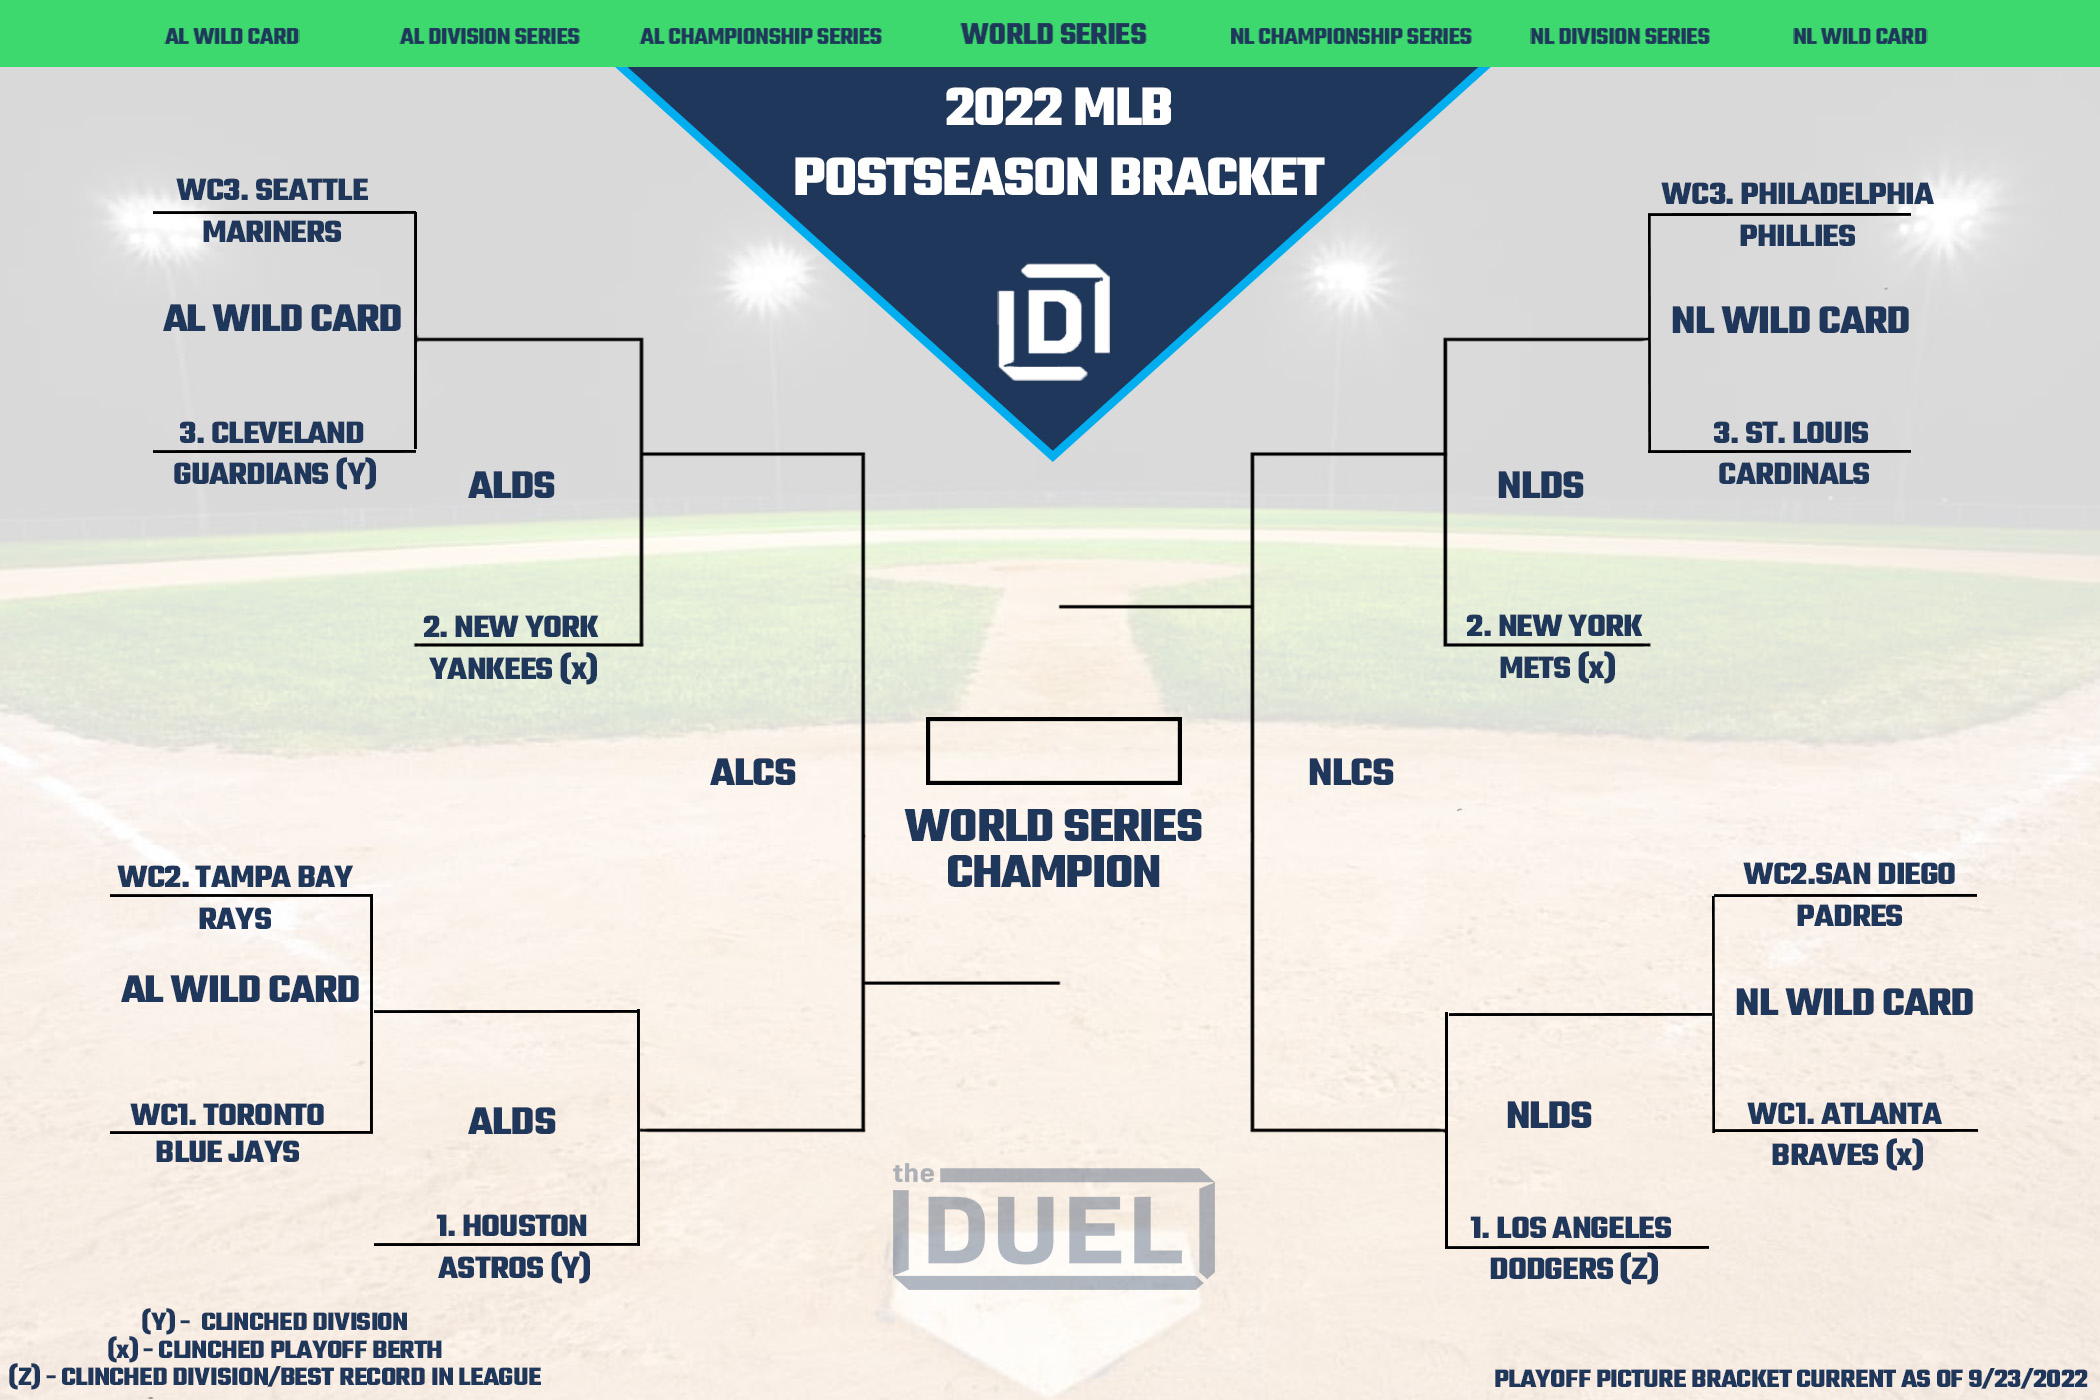 MLB Playoff Picture Bracket for the 2022 Postseason as of September 26